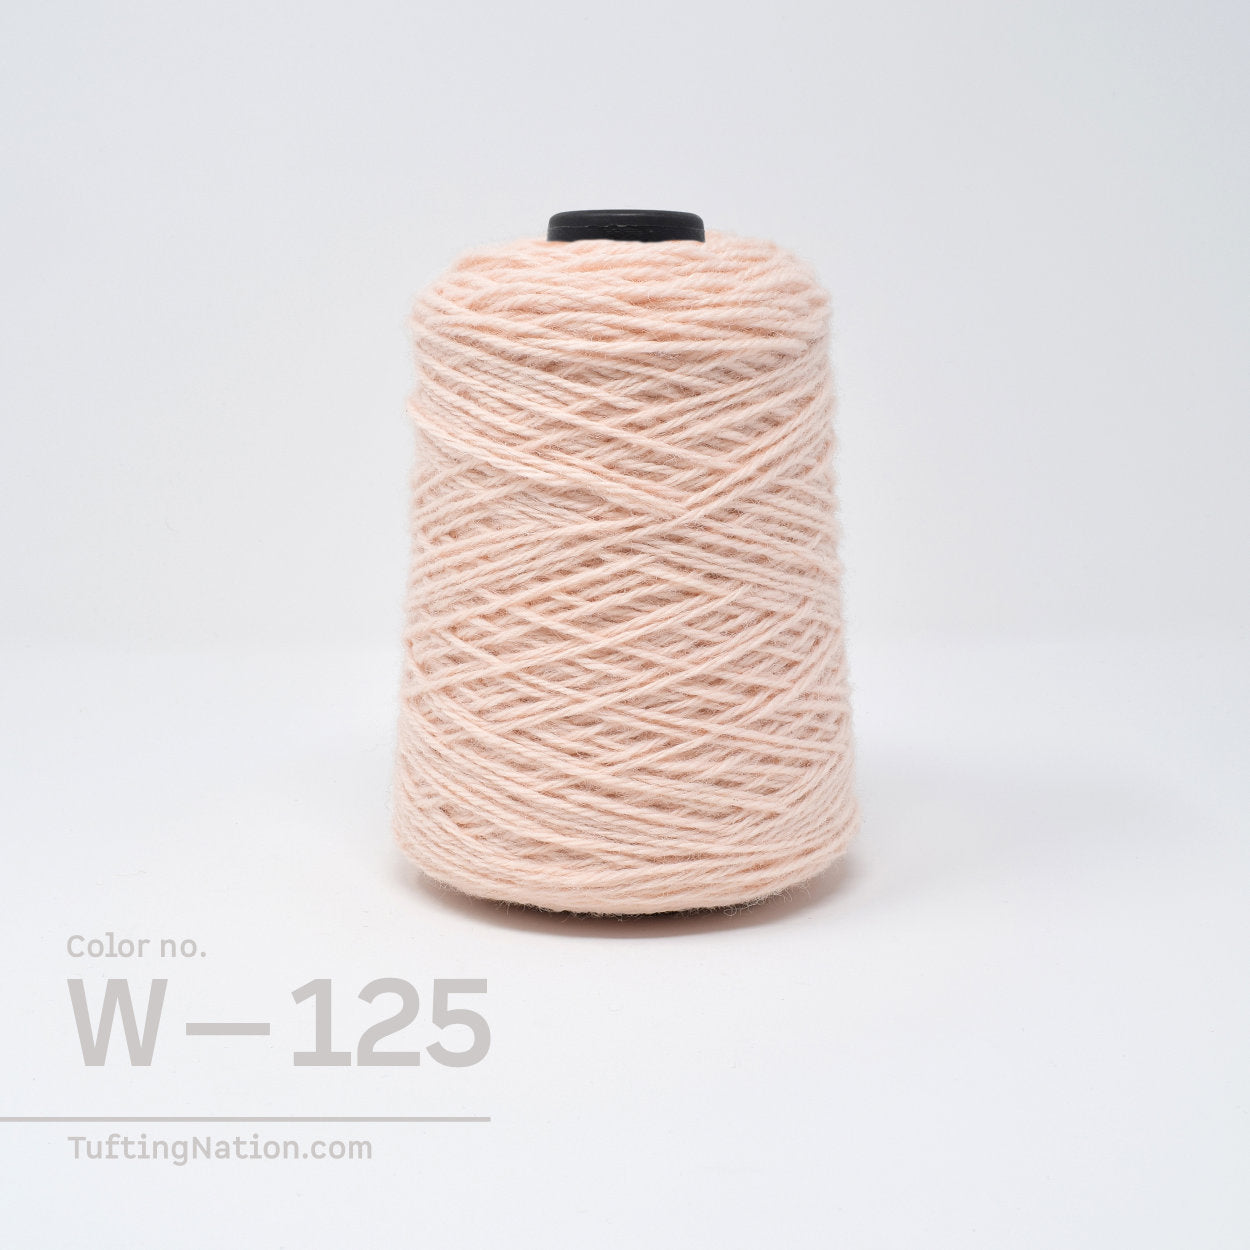 Pale Pink Wool Rug Yarn on 1/2 pound Cone for Rug Tufting, Weaving and Punch Needle | TuftingNation